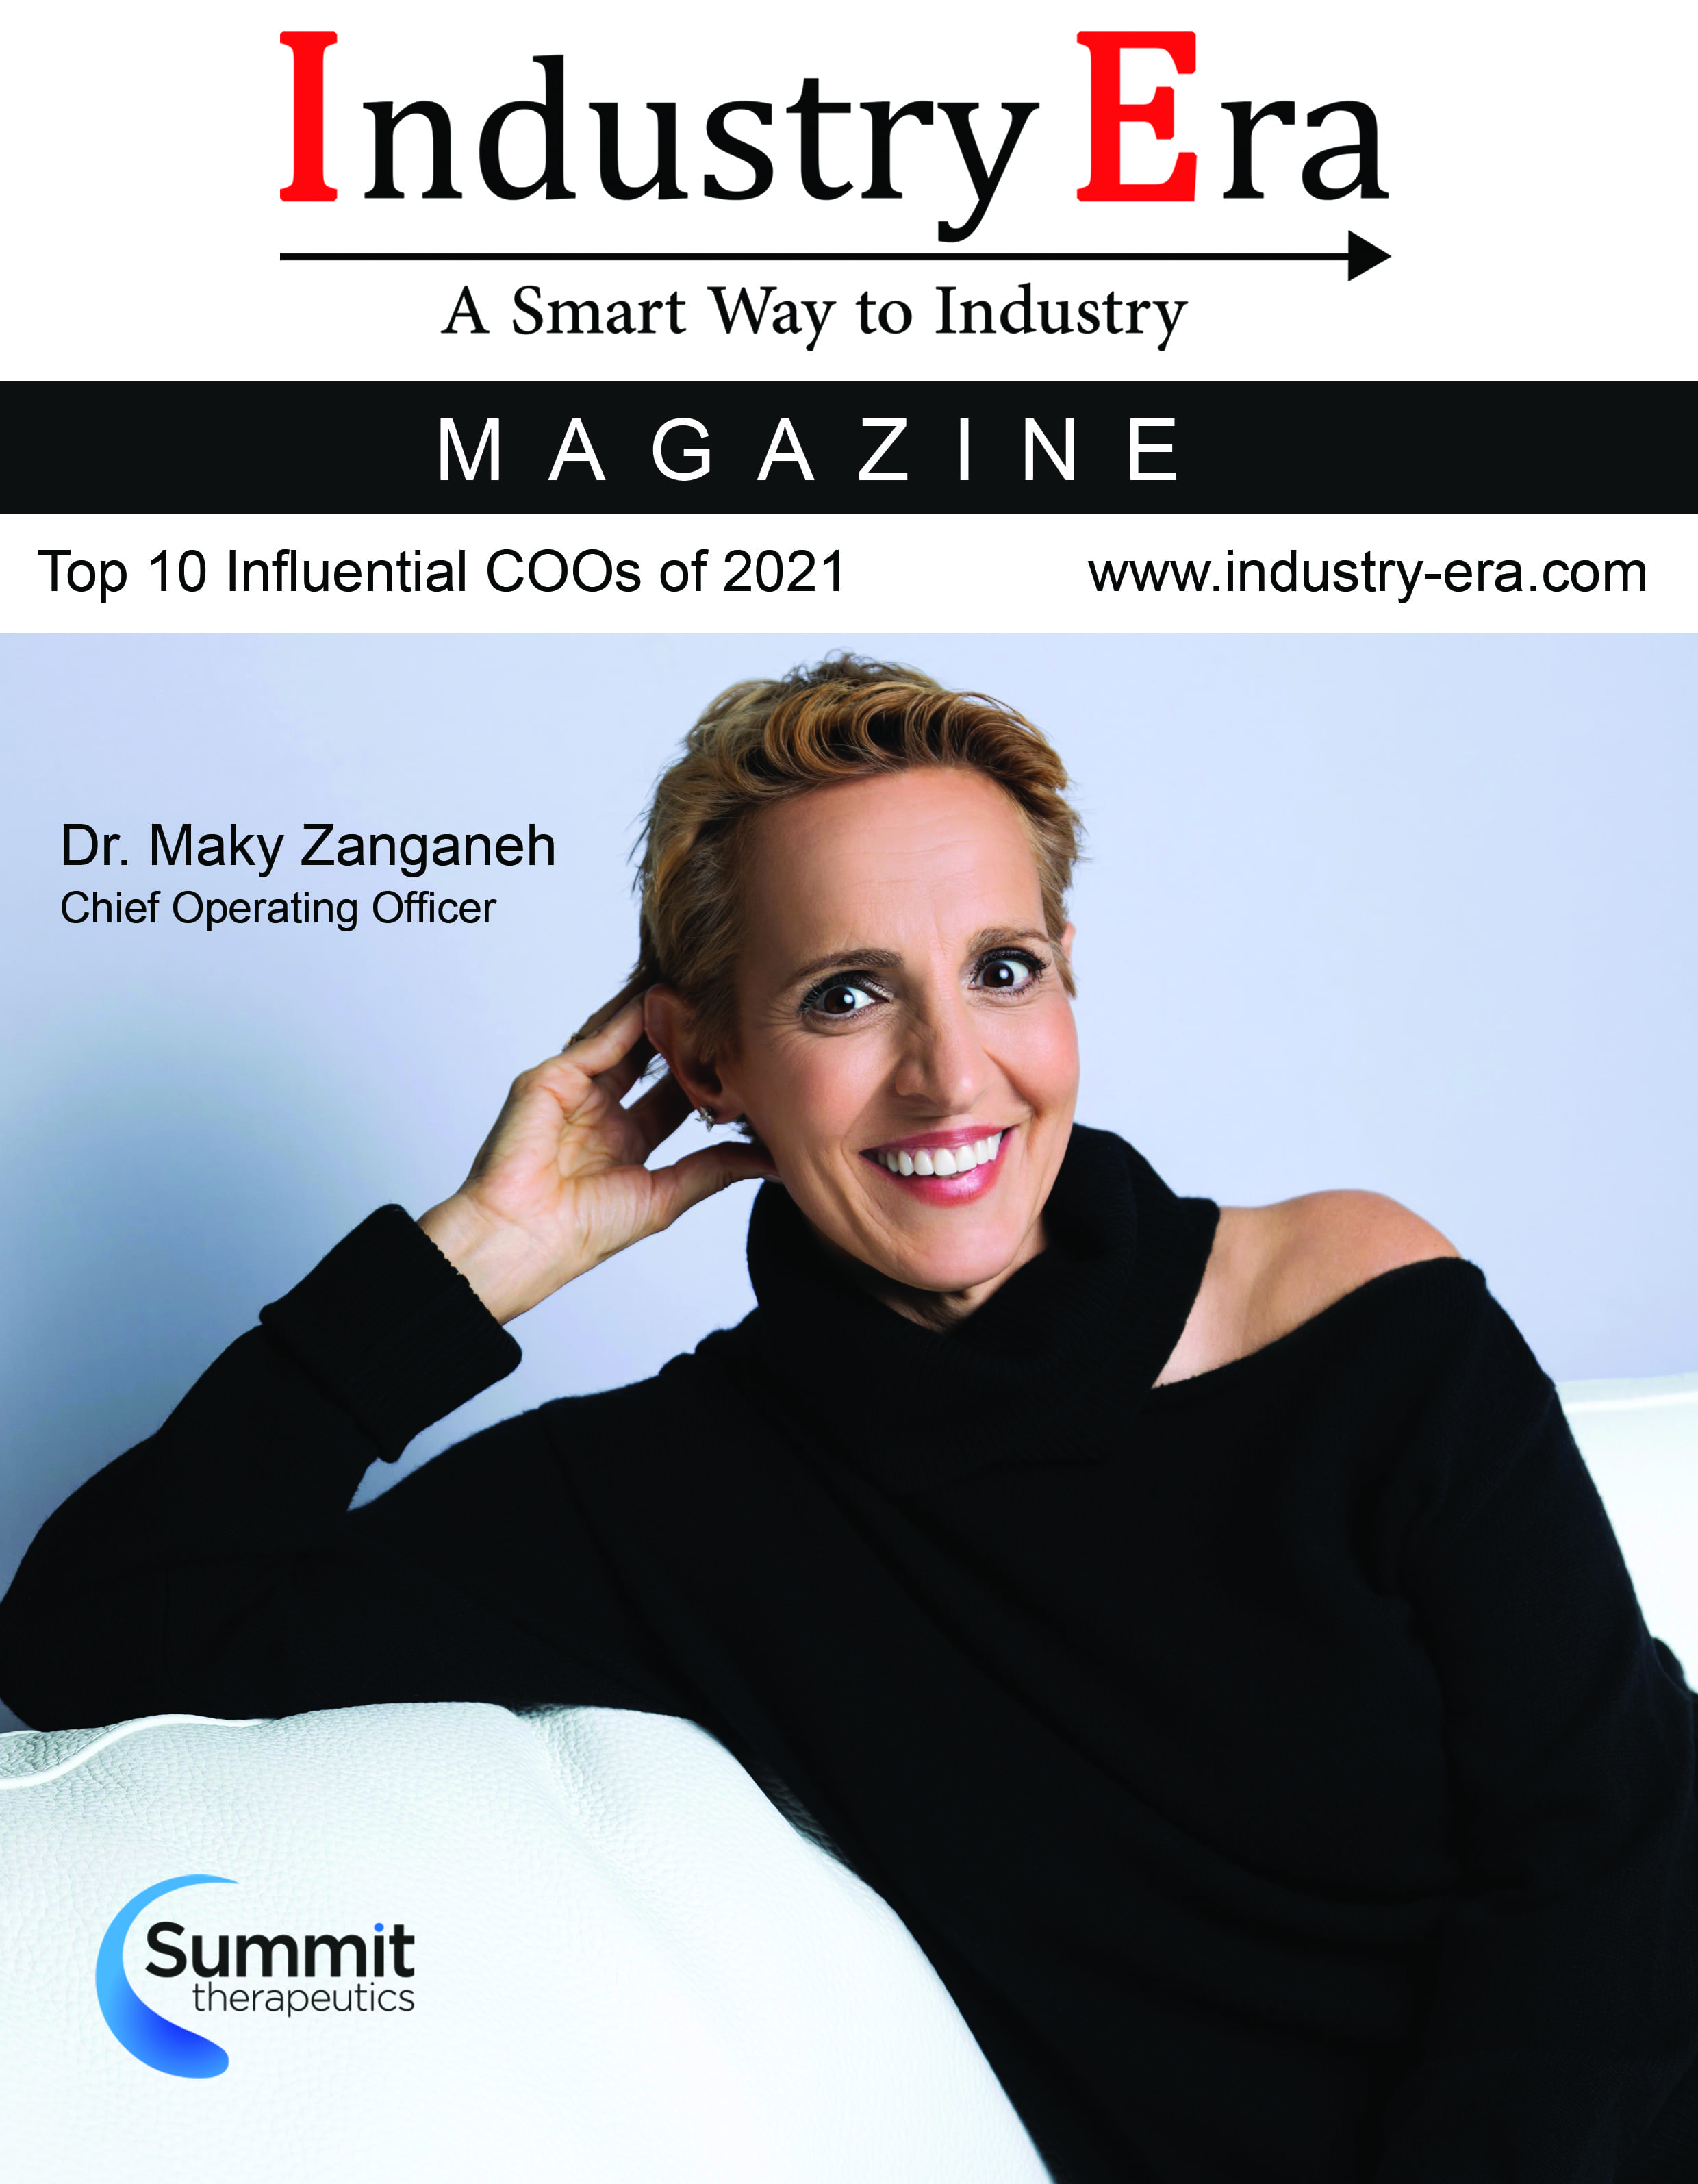 Top 10 Influential COOs of 2021 Magazine